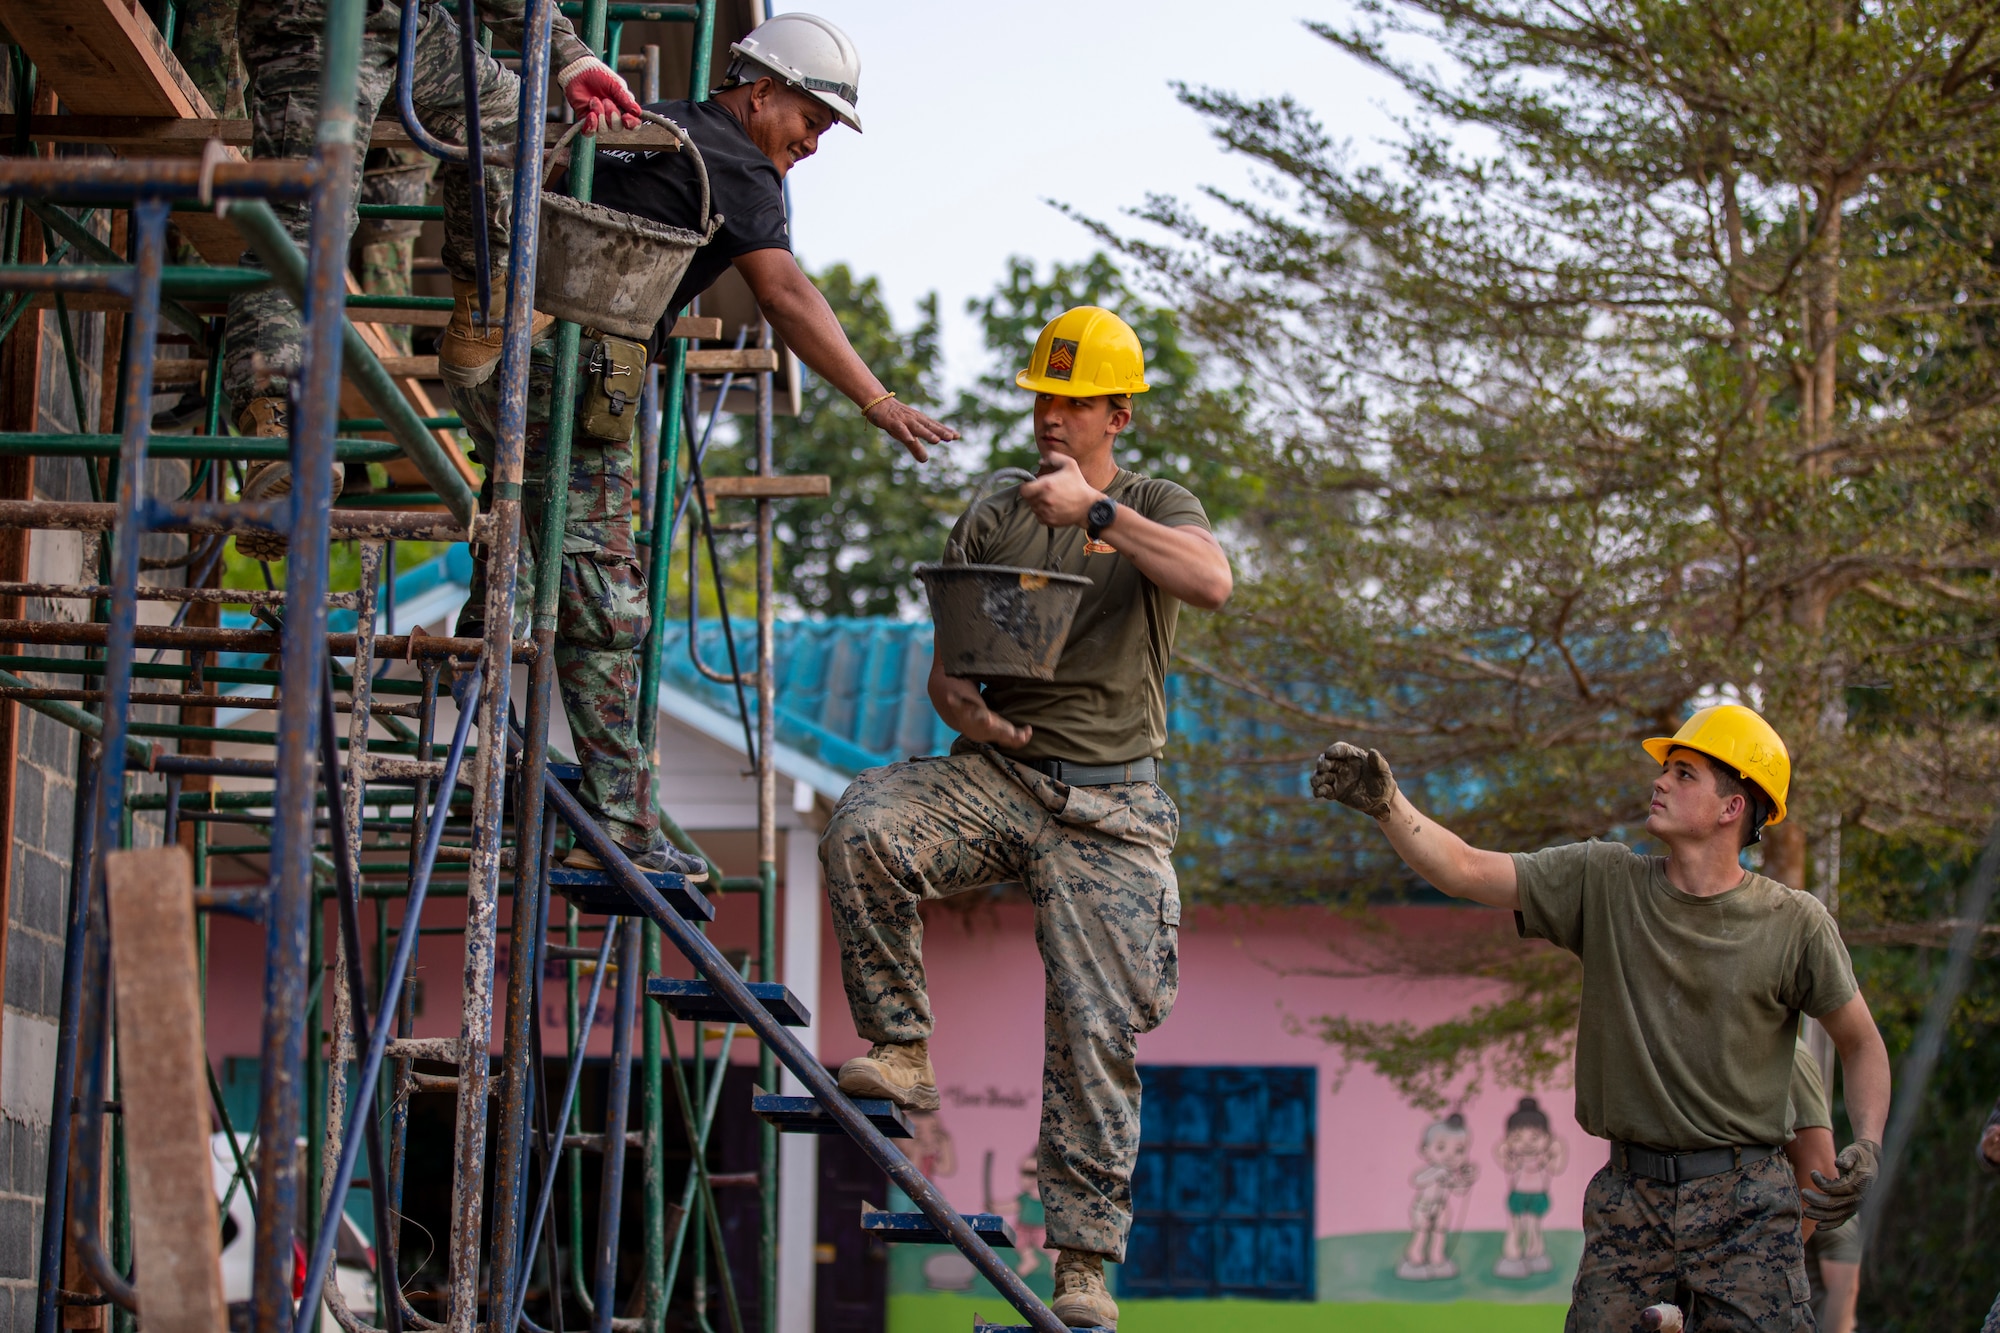 Royal Thai Marines and U.S. Marines with Marine Wing Support Squadron (MWSS) 171, form a human conveyor belt to transport buckets of mortar for wall construction during Exercise Cobra Gold 23 (CG23) at Chanthaburi, Kingdom of Thailand, Feb. 20, 2023.